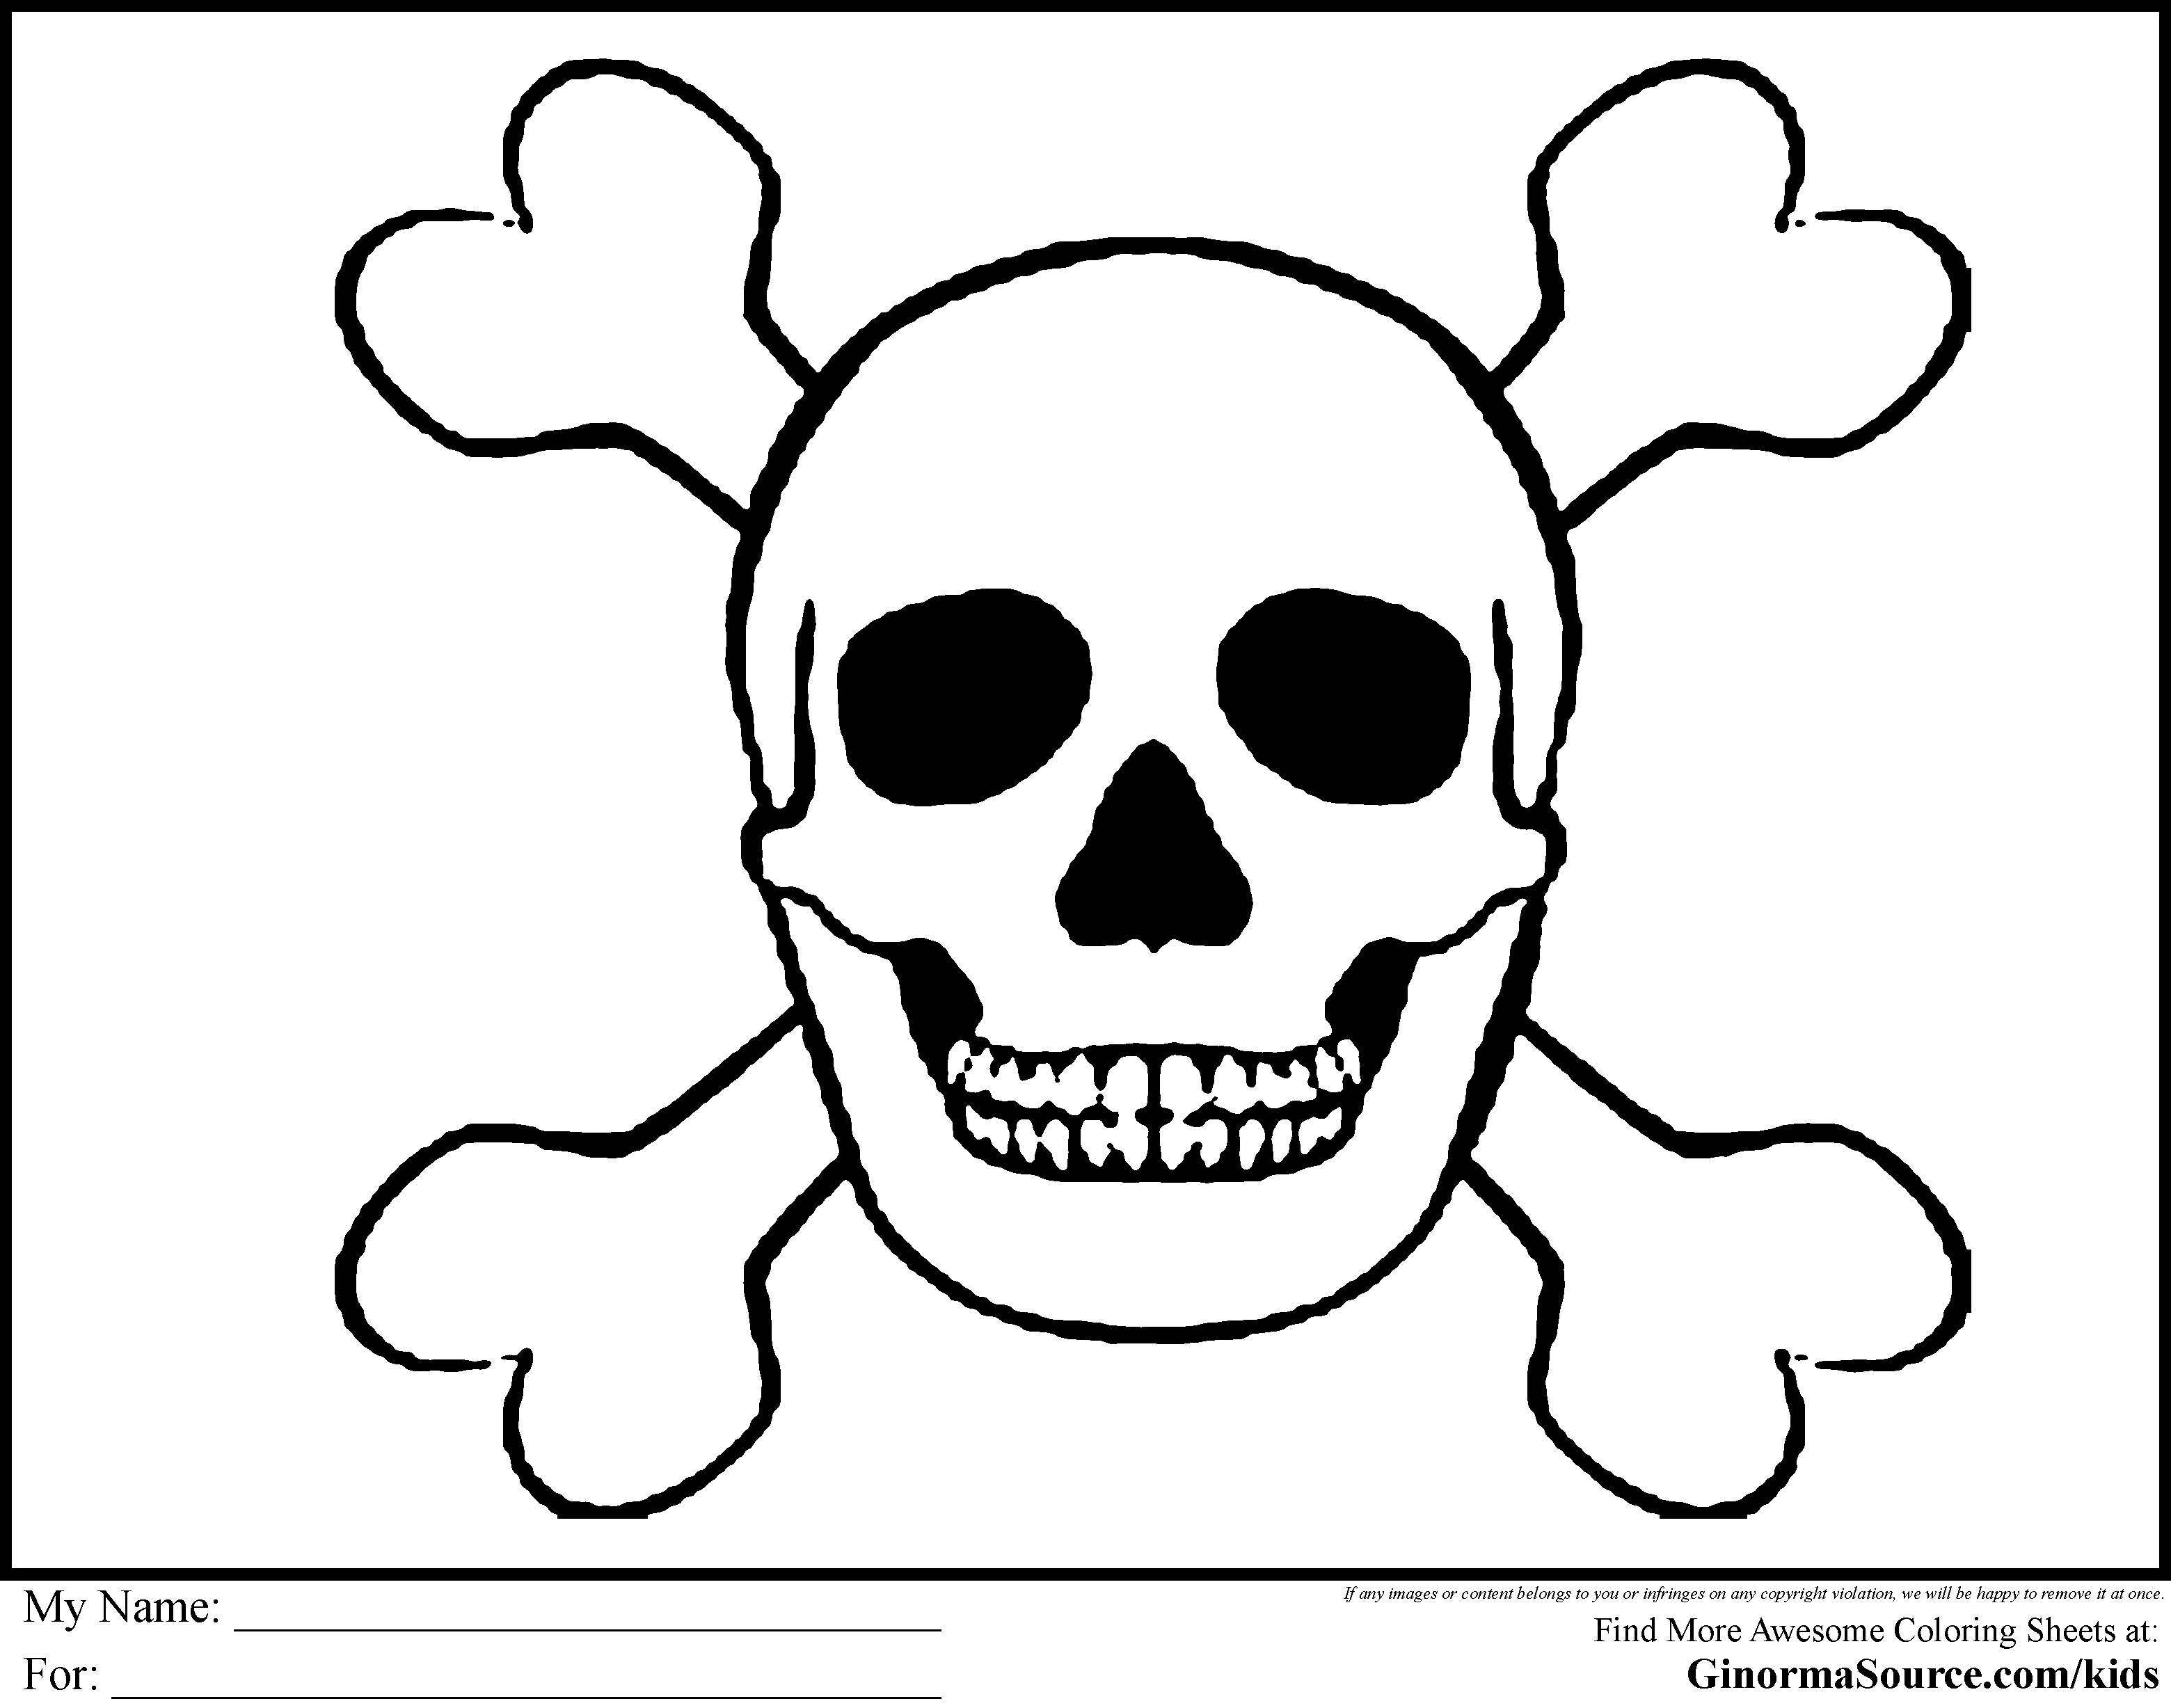 Adventure awaits pirate coloring pages for kids